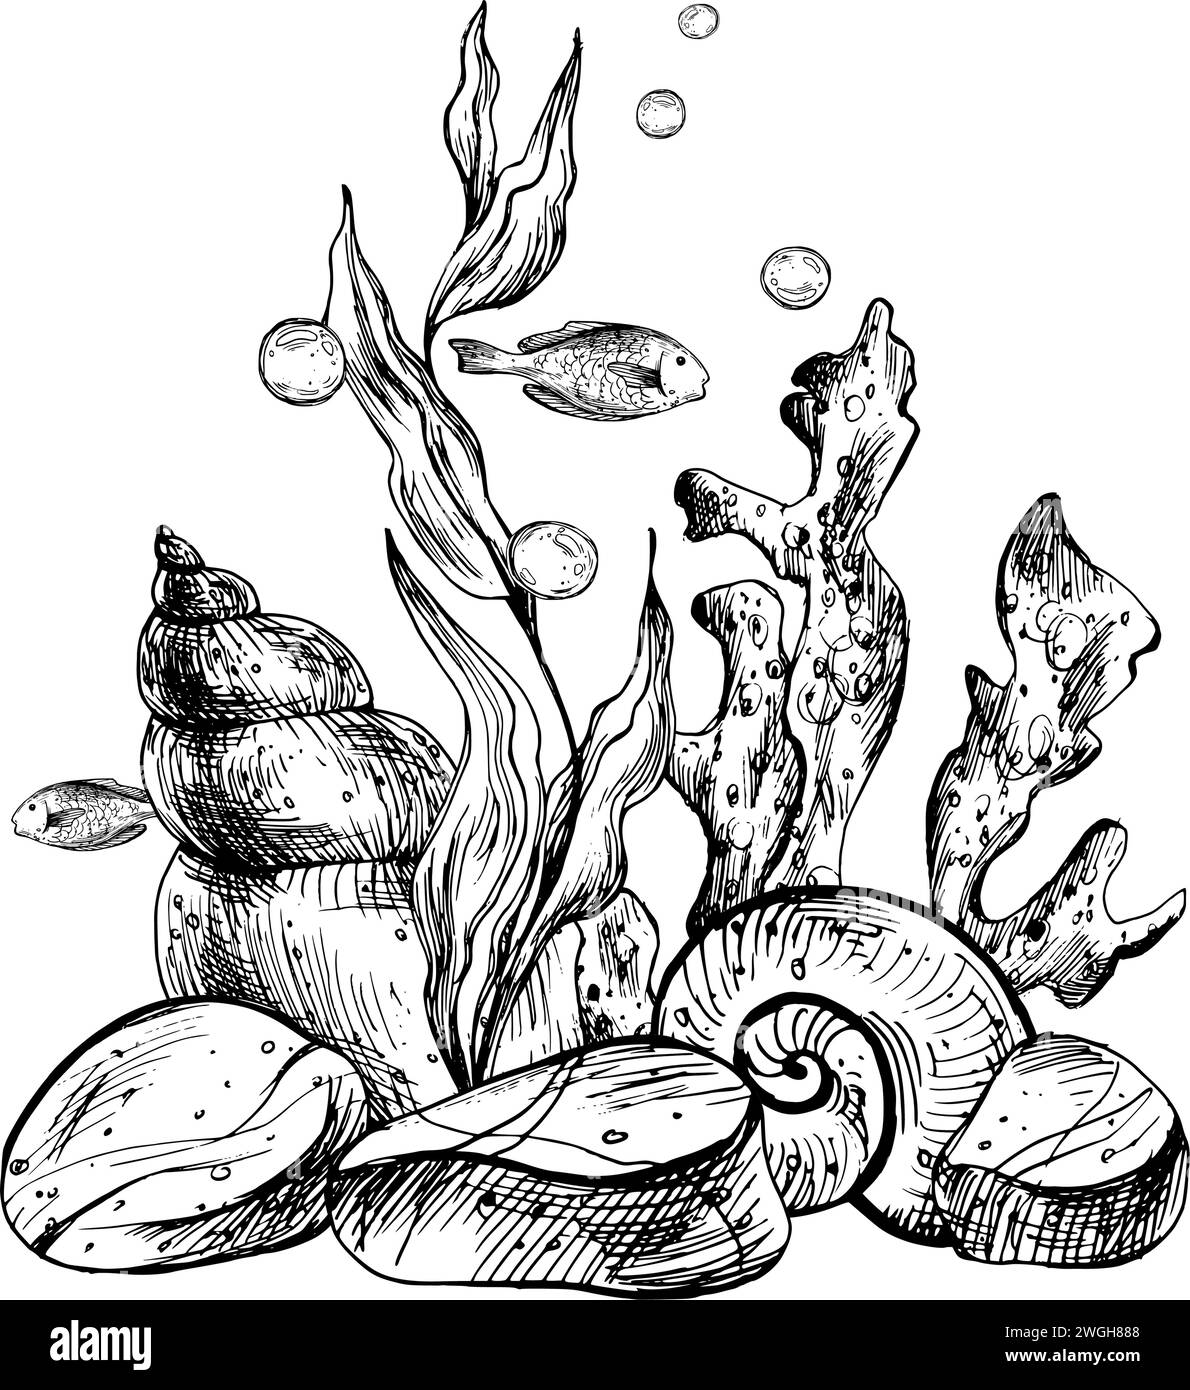 Underwater world clipart with sea animals fishes, shells, coral and algae. Graphic illustration hand drawn in black ink. Composition EPS vector. Stock Vector